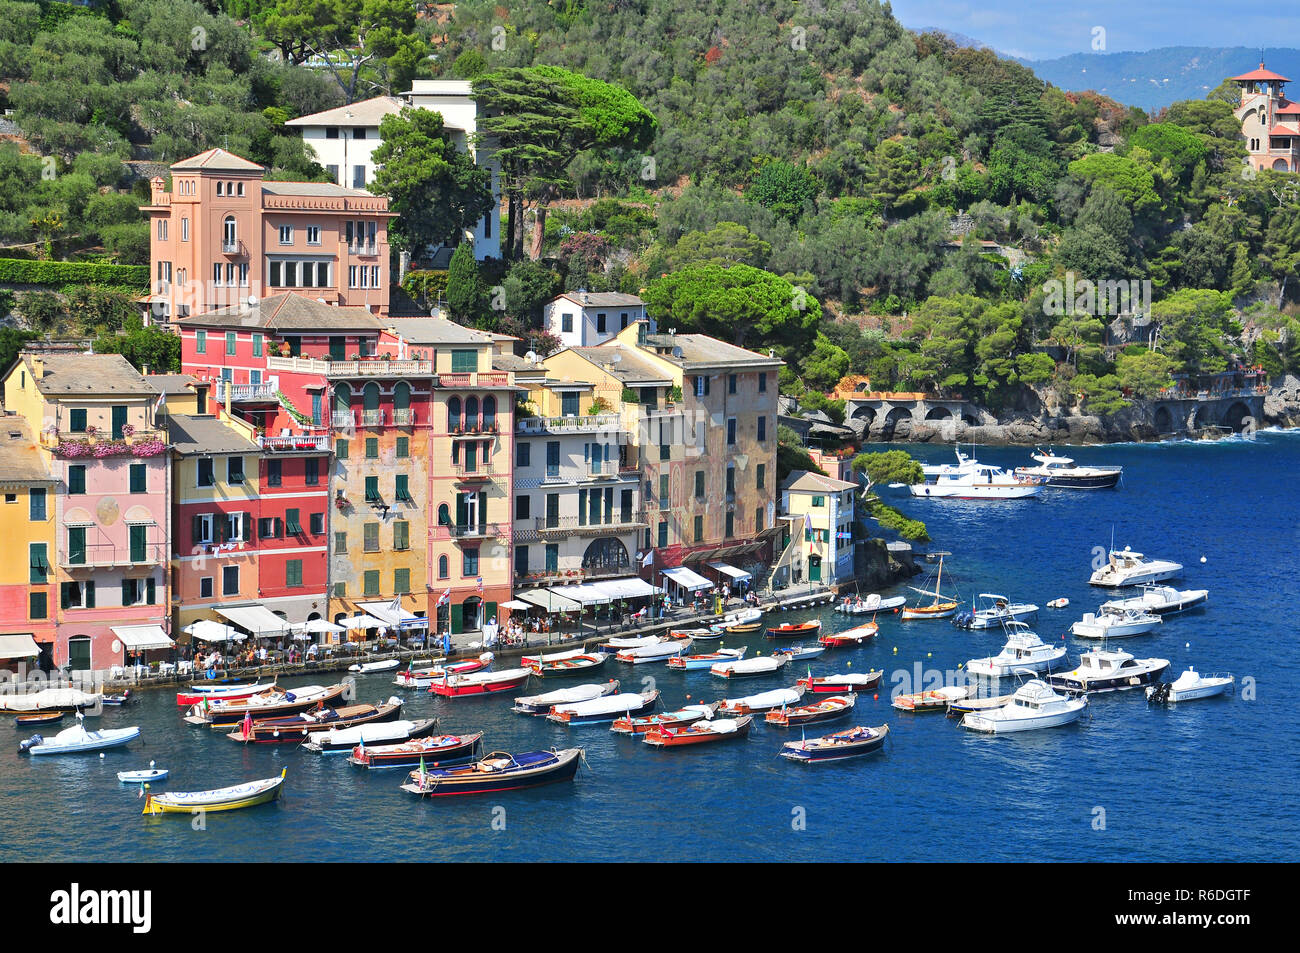 Liguria Portofino View Of Harbor With Moored Boats And Pastel Colored Houses Lining The Bay With Trees On Hills Behind Stock Photo